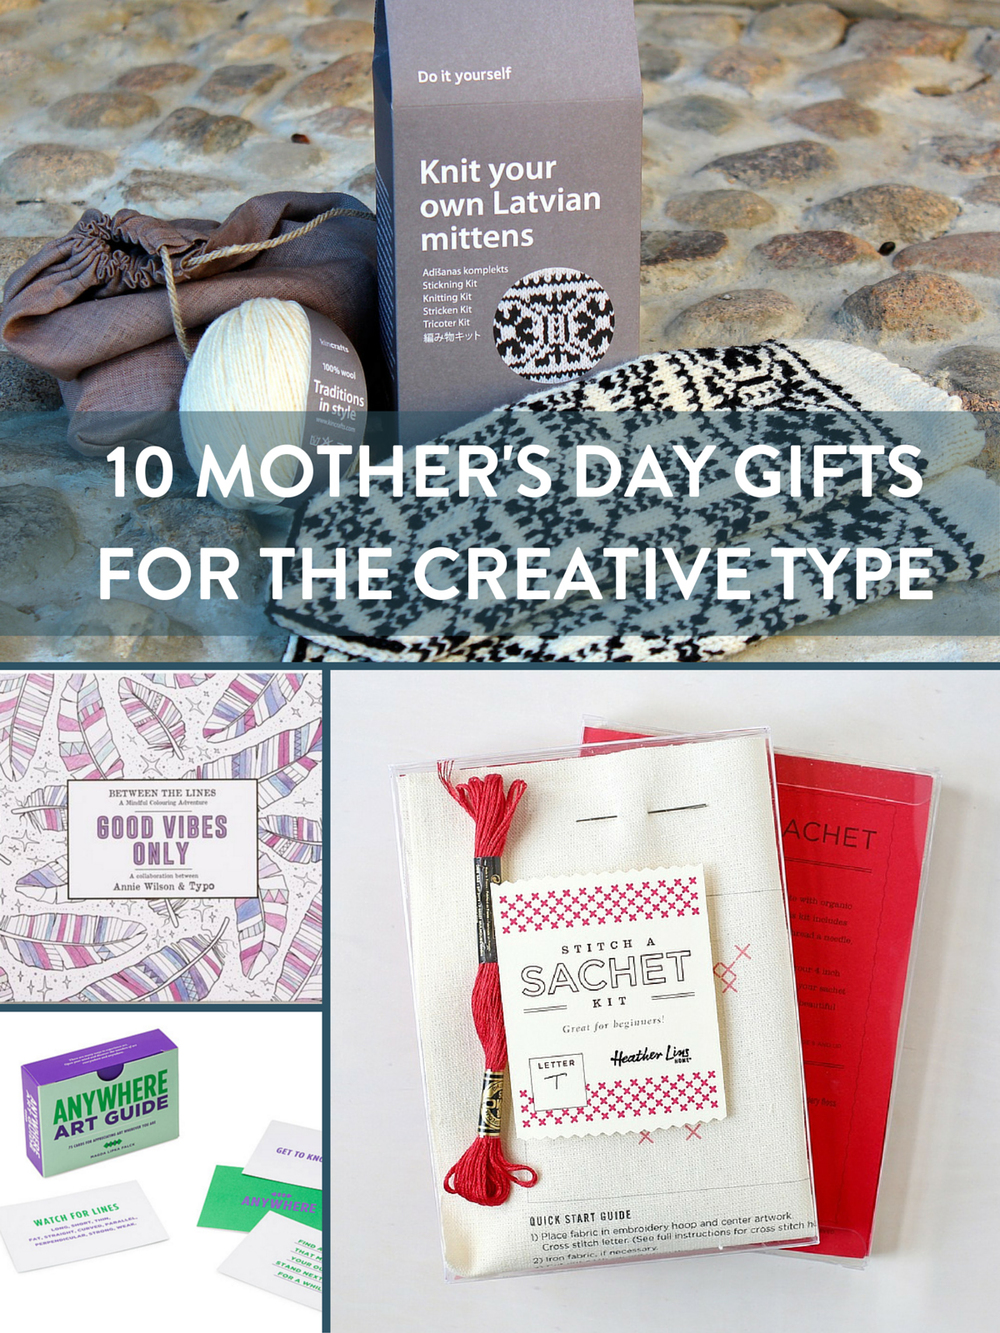 Shopping Guide: 10 Mother's Day Gifts For The Creative Type - Curbly